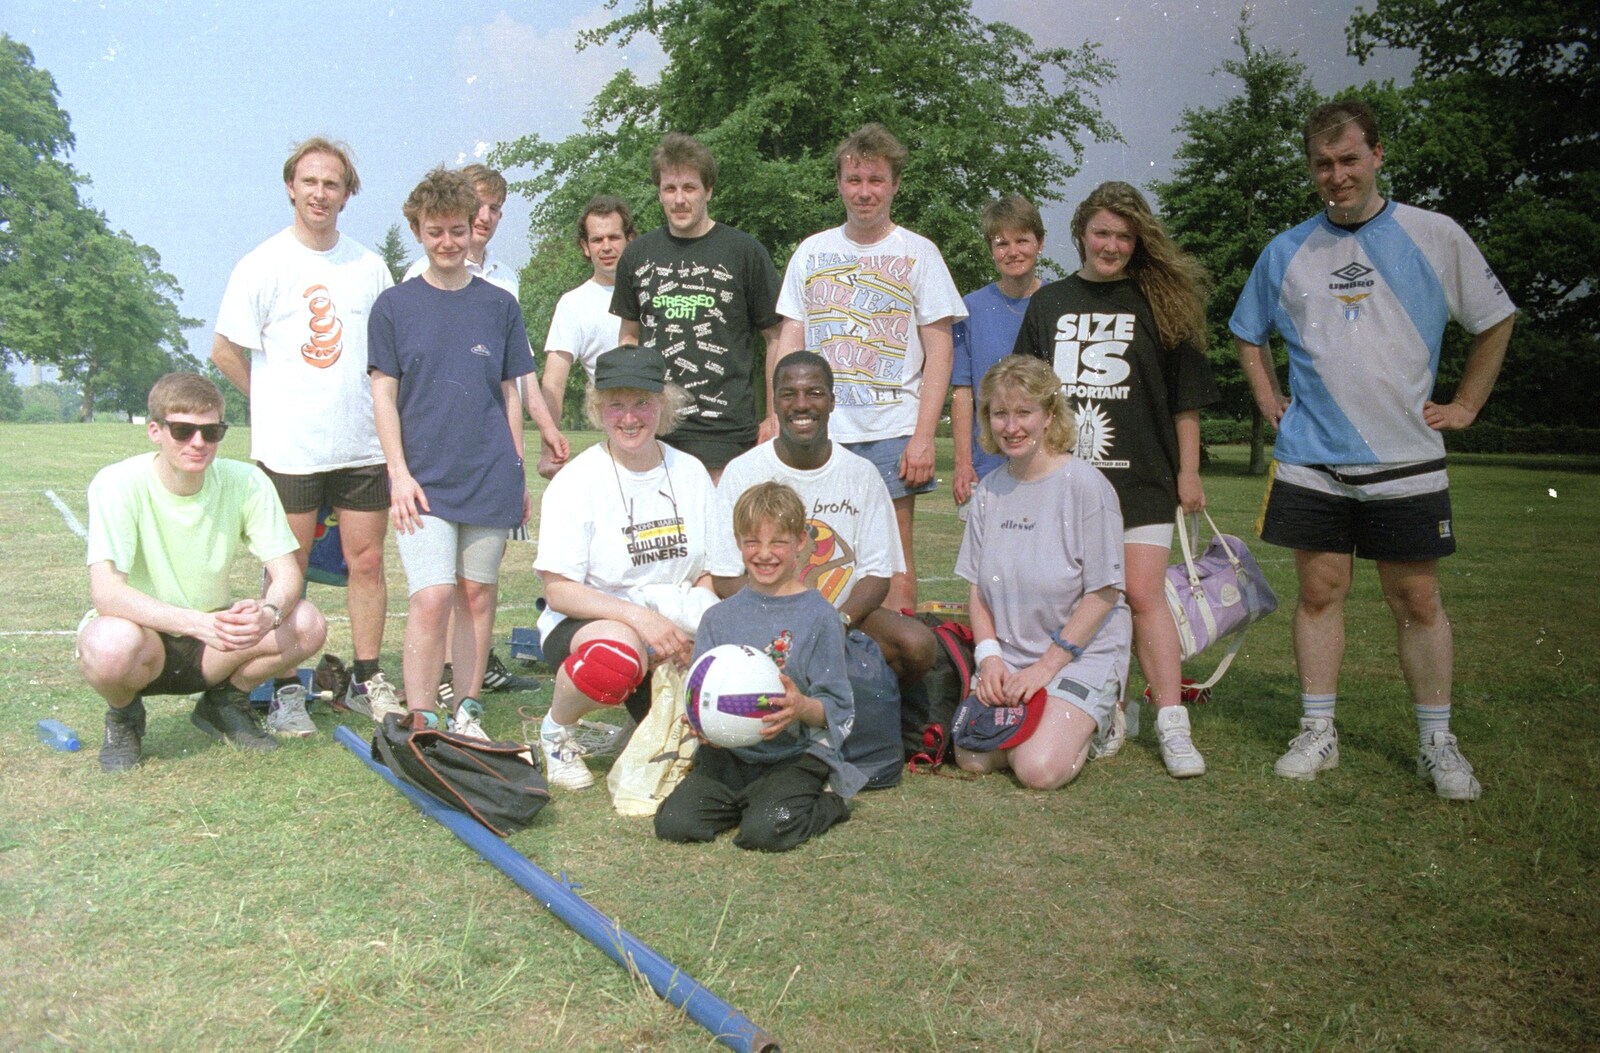 The SCC team again from CISU: A Chinese Restaurant and SCC Sports Day, Ipswich and Norwich - 1st May 1997